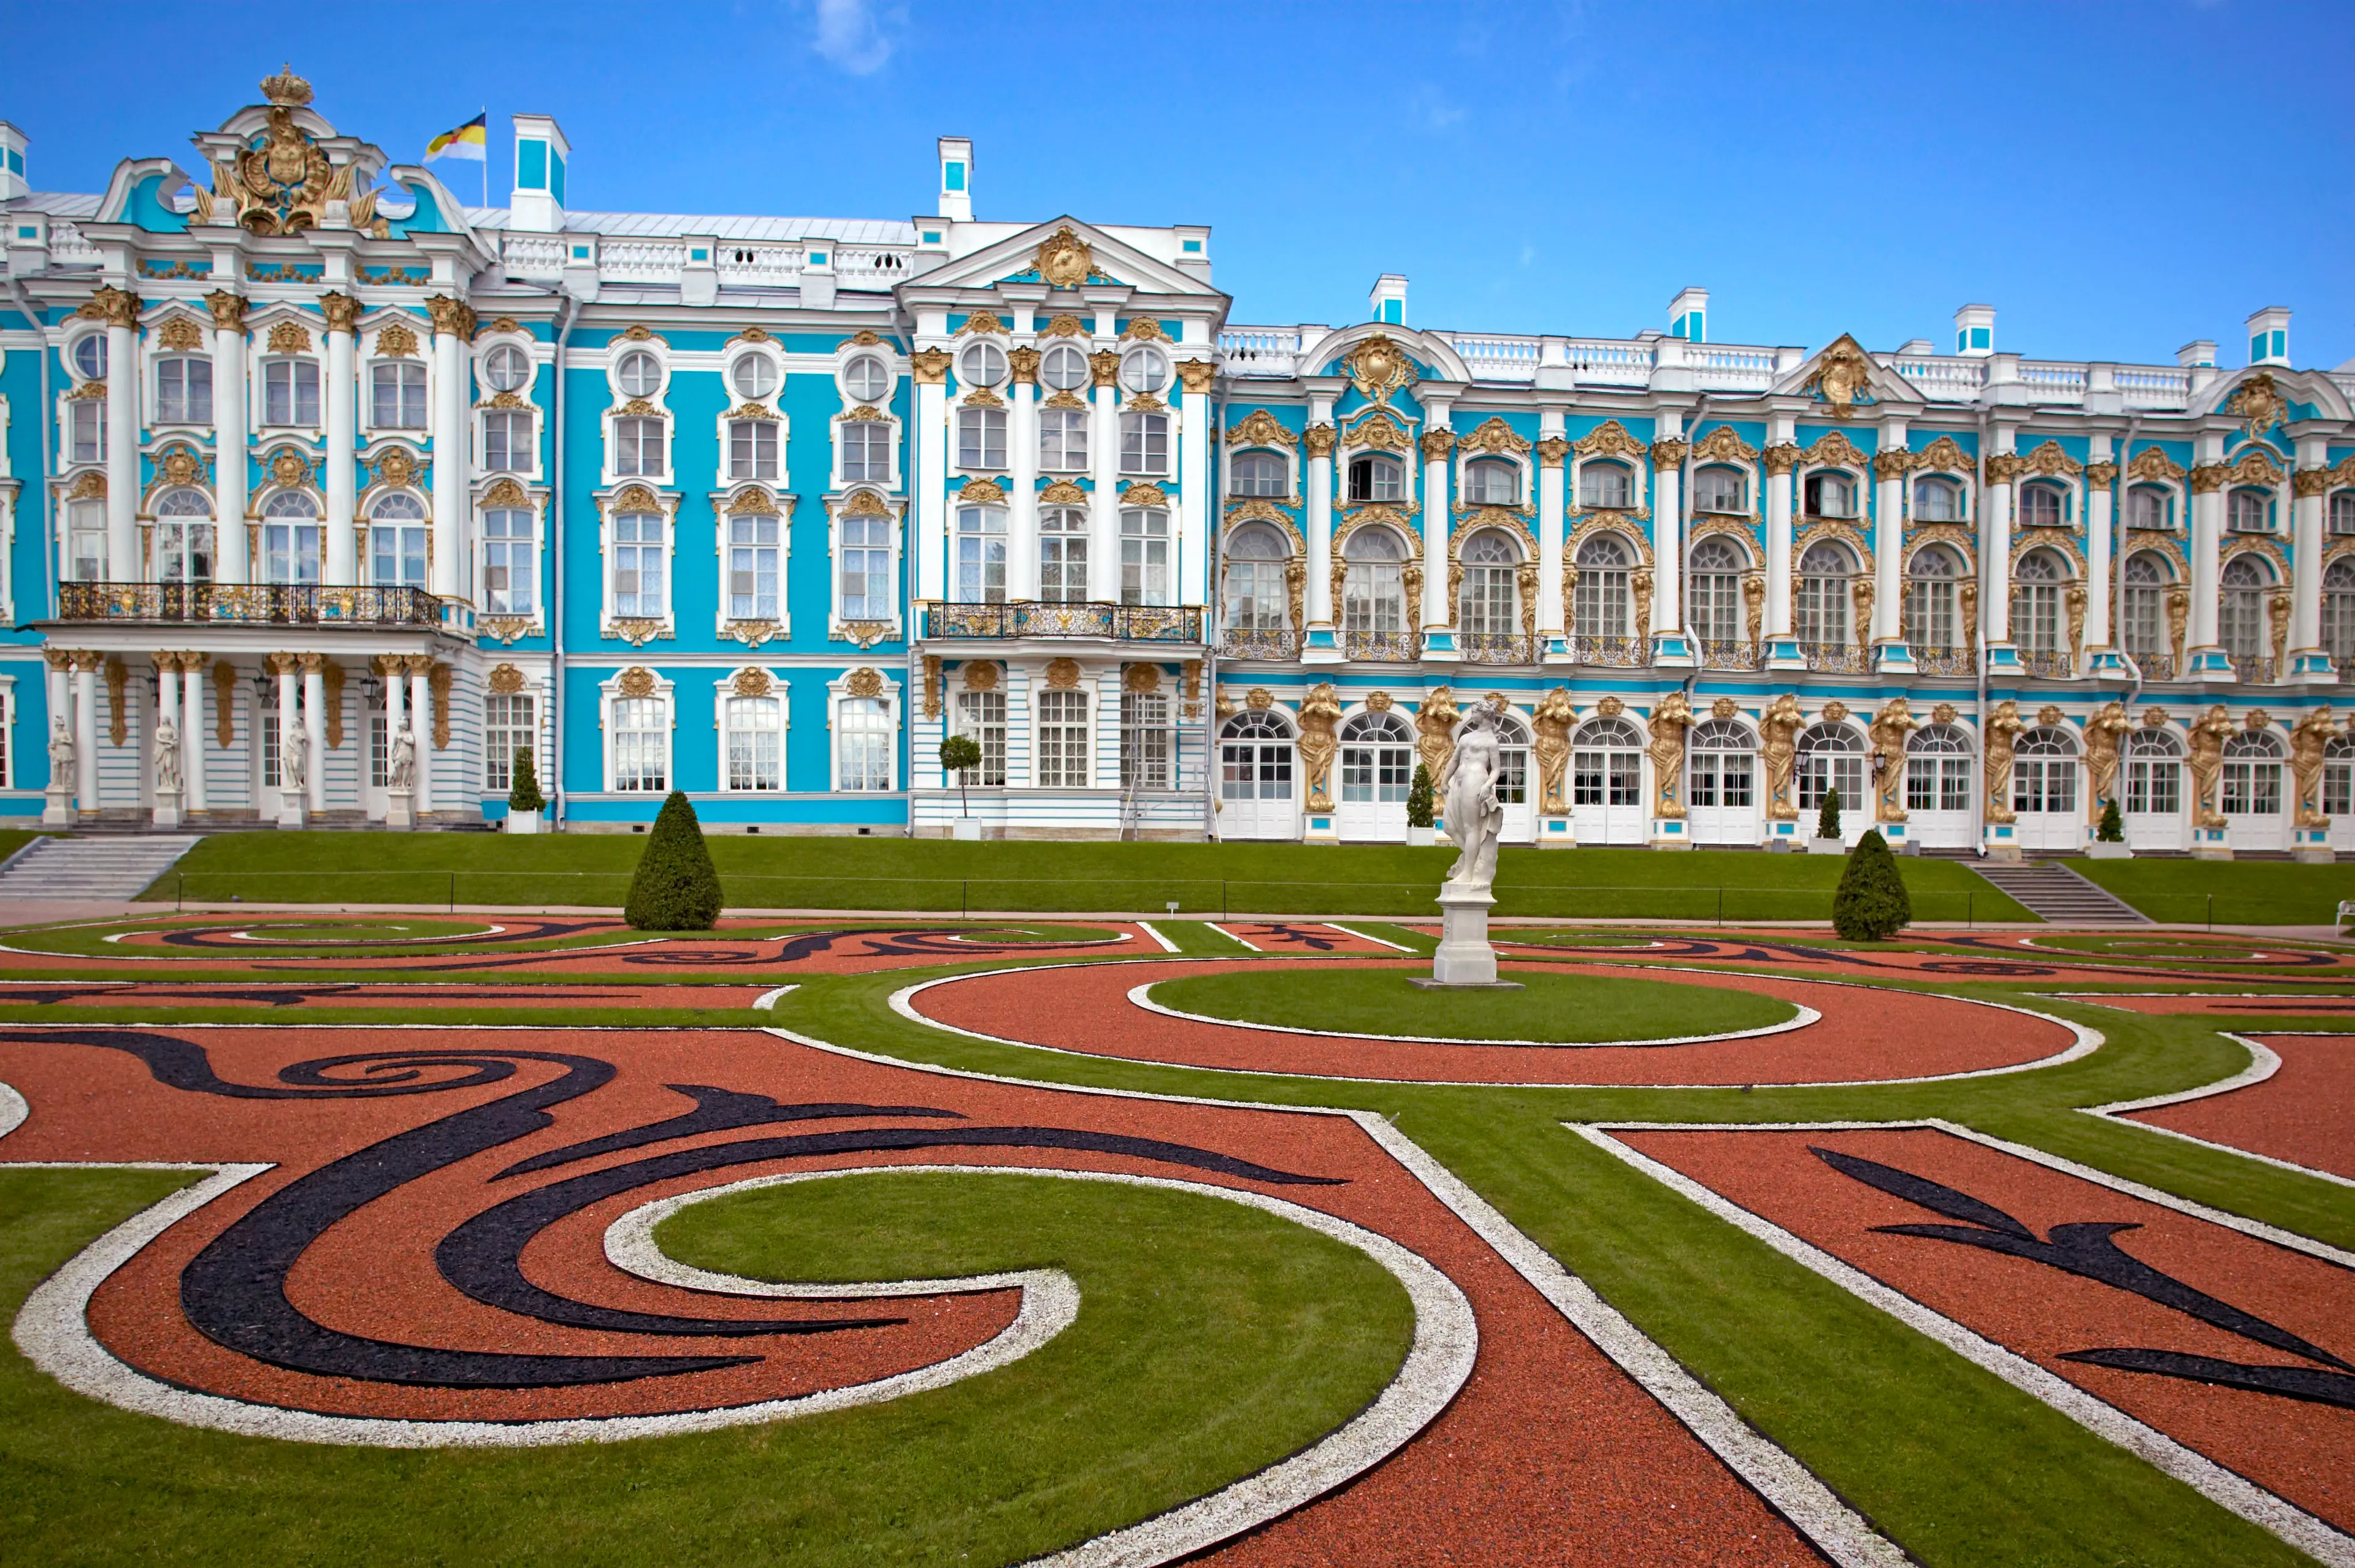 4-Day Sightseeing and Shopping Adventure in Saint Petersburg with Friends